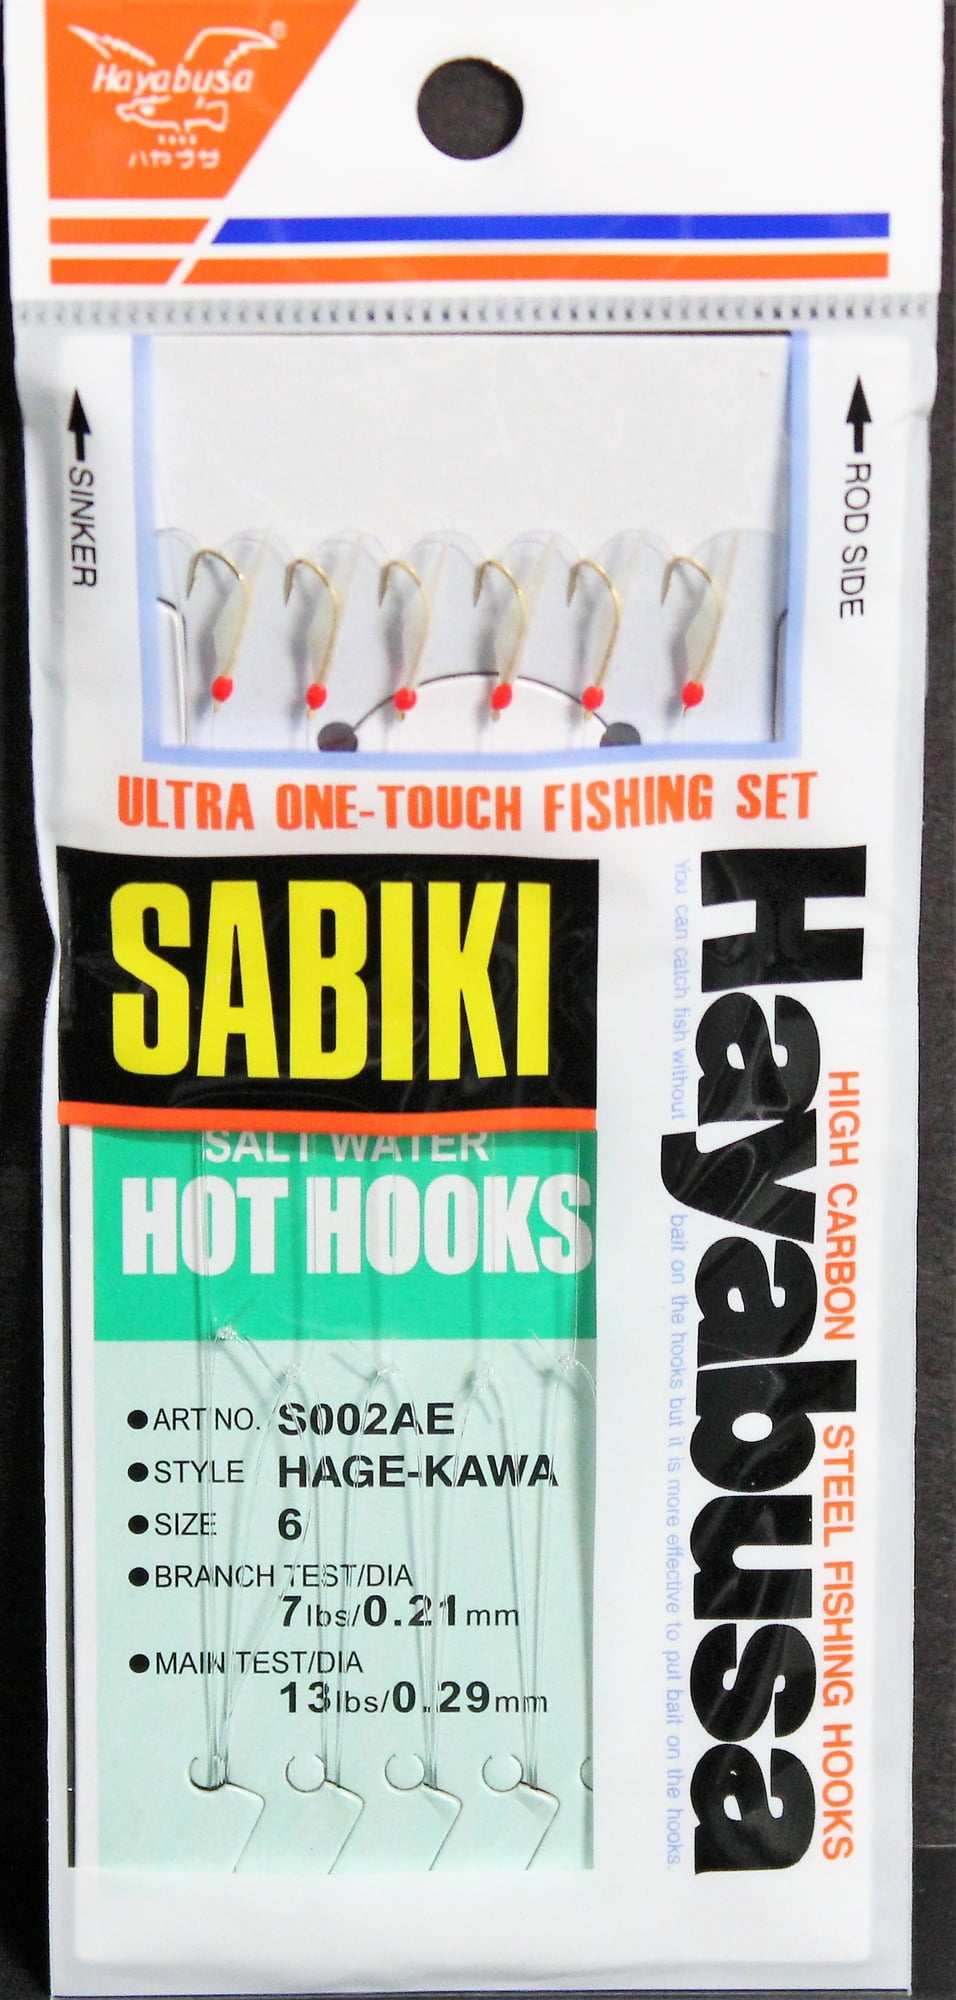 Hayabusa S002ae Size 4 Red Hot Hooks Sabiki Rigs for sale online 